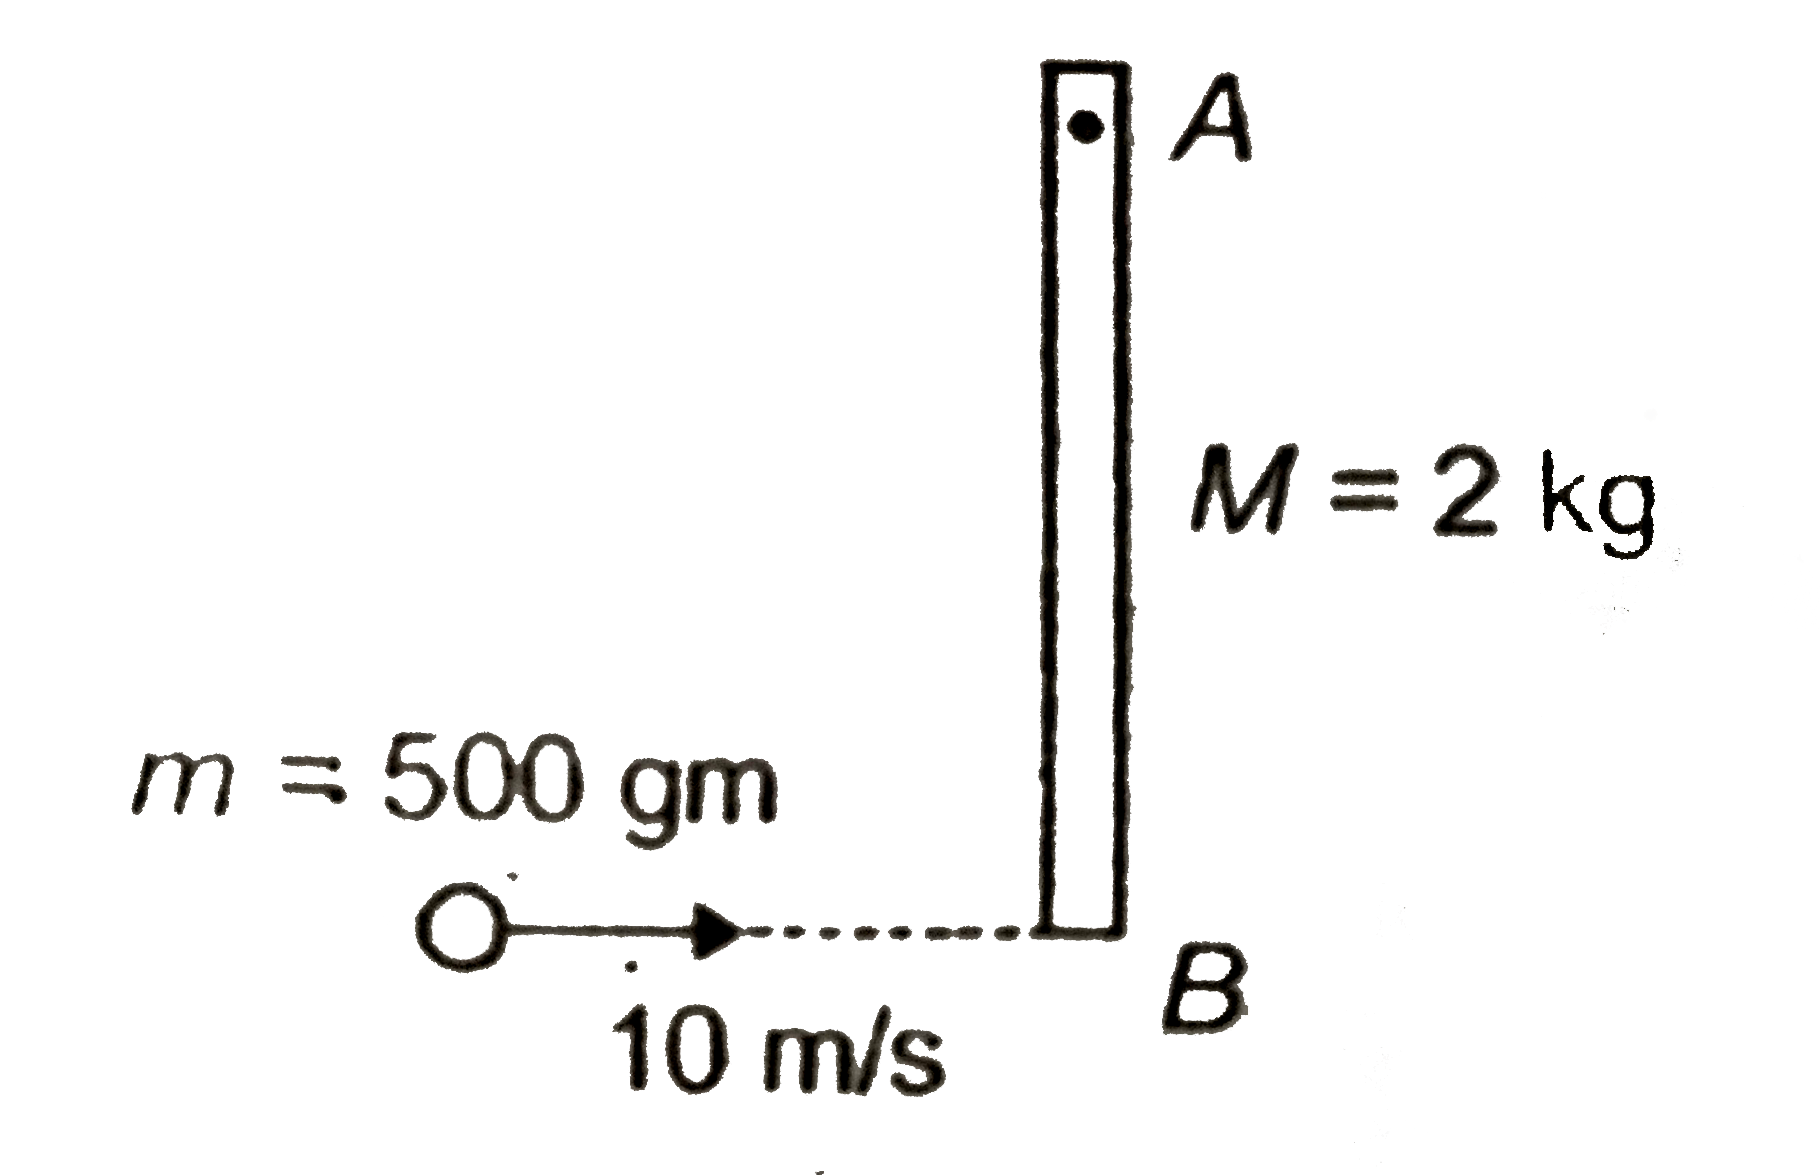 A rod of mass 2kg and length 1m is pivoted at one end A and kept on a smooth surface. A particle of mass 500gm strikes the other end B of the rod and sticks to the rod. If particle was moving with the speed of 10m//s, what is the angular speed of the rod after collision ?